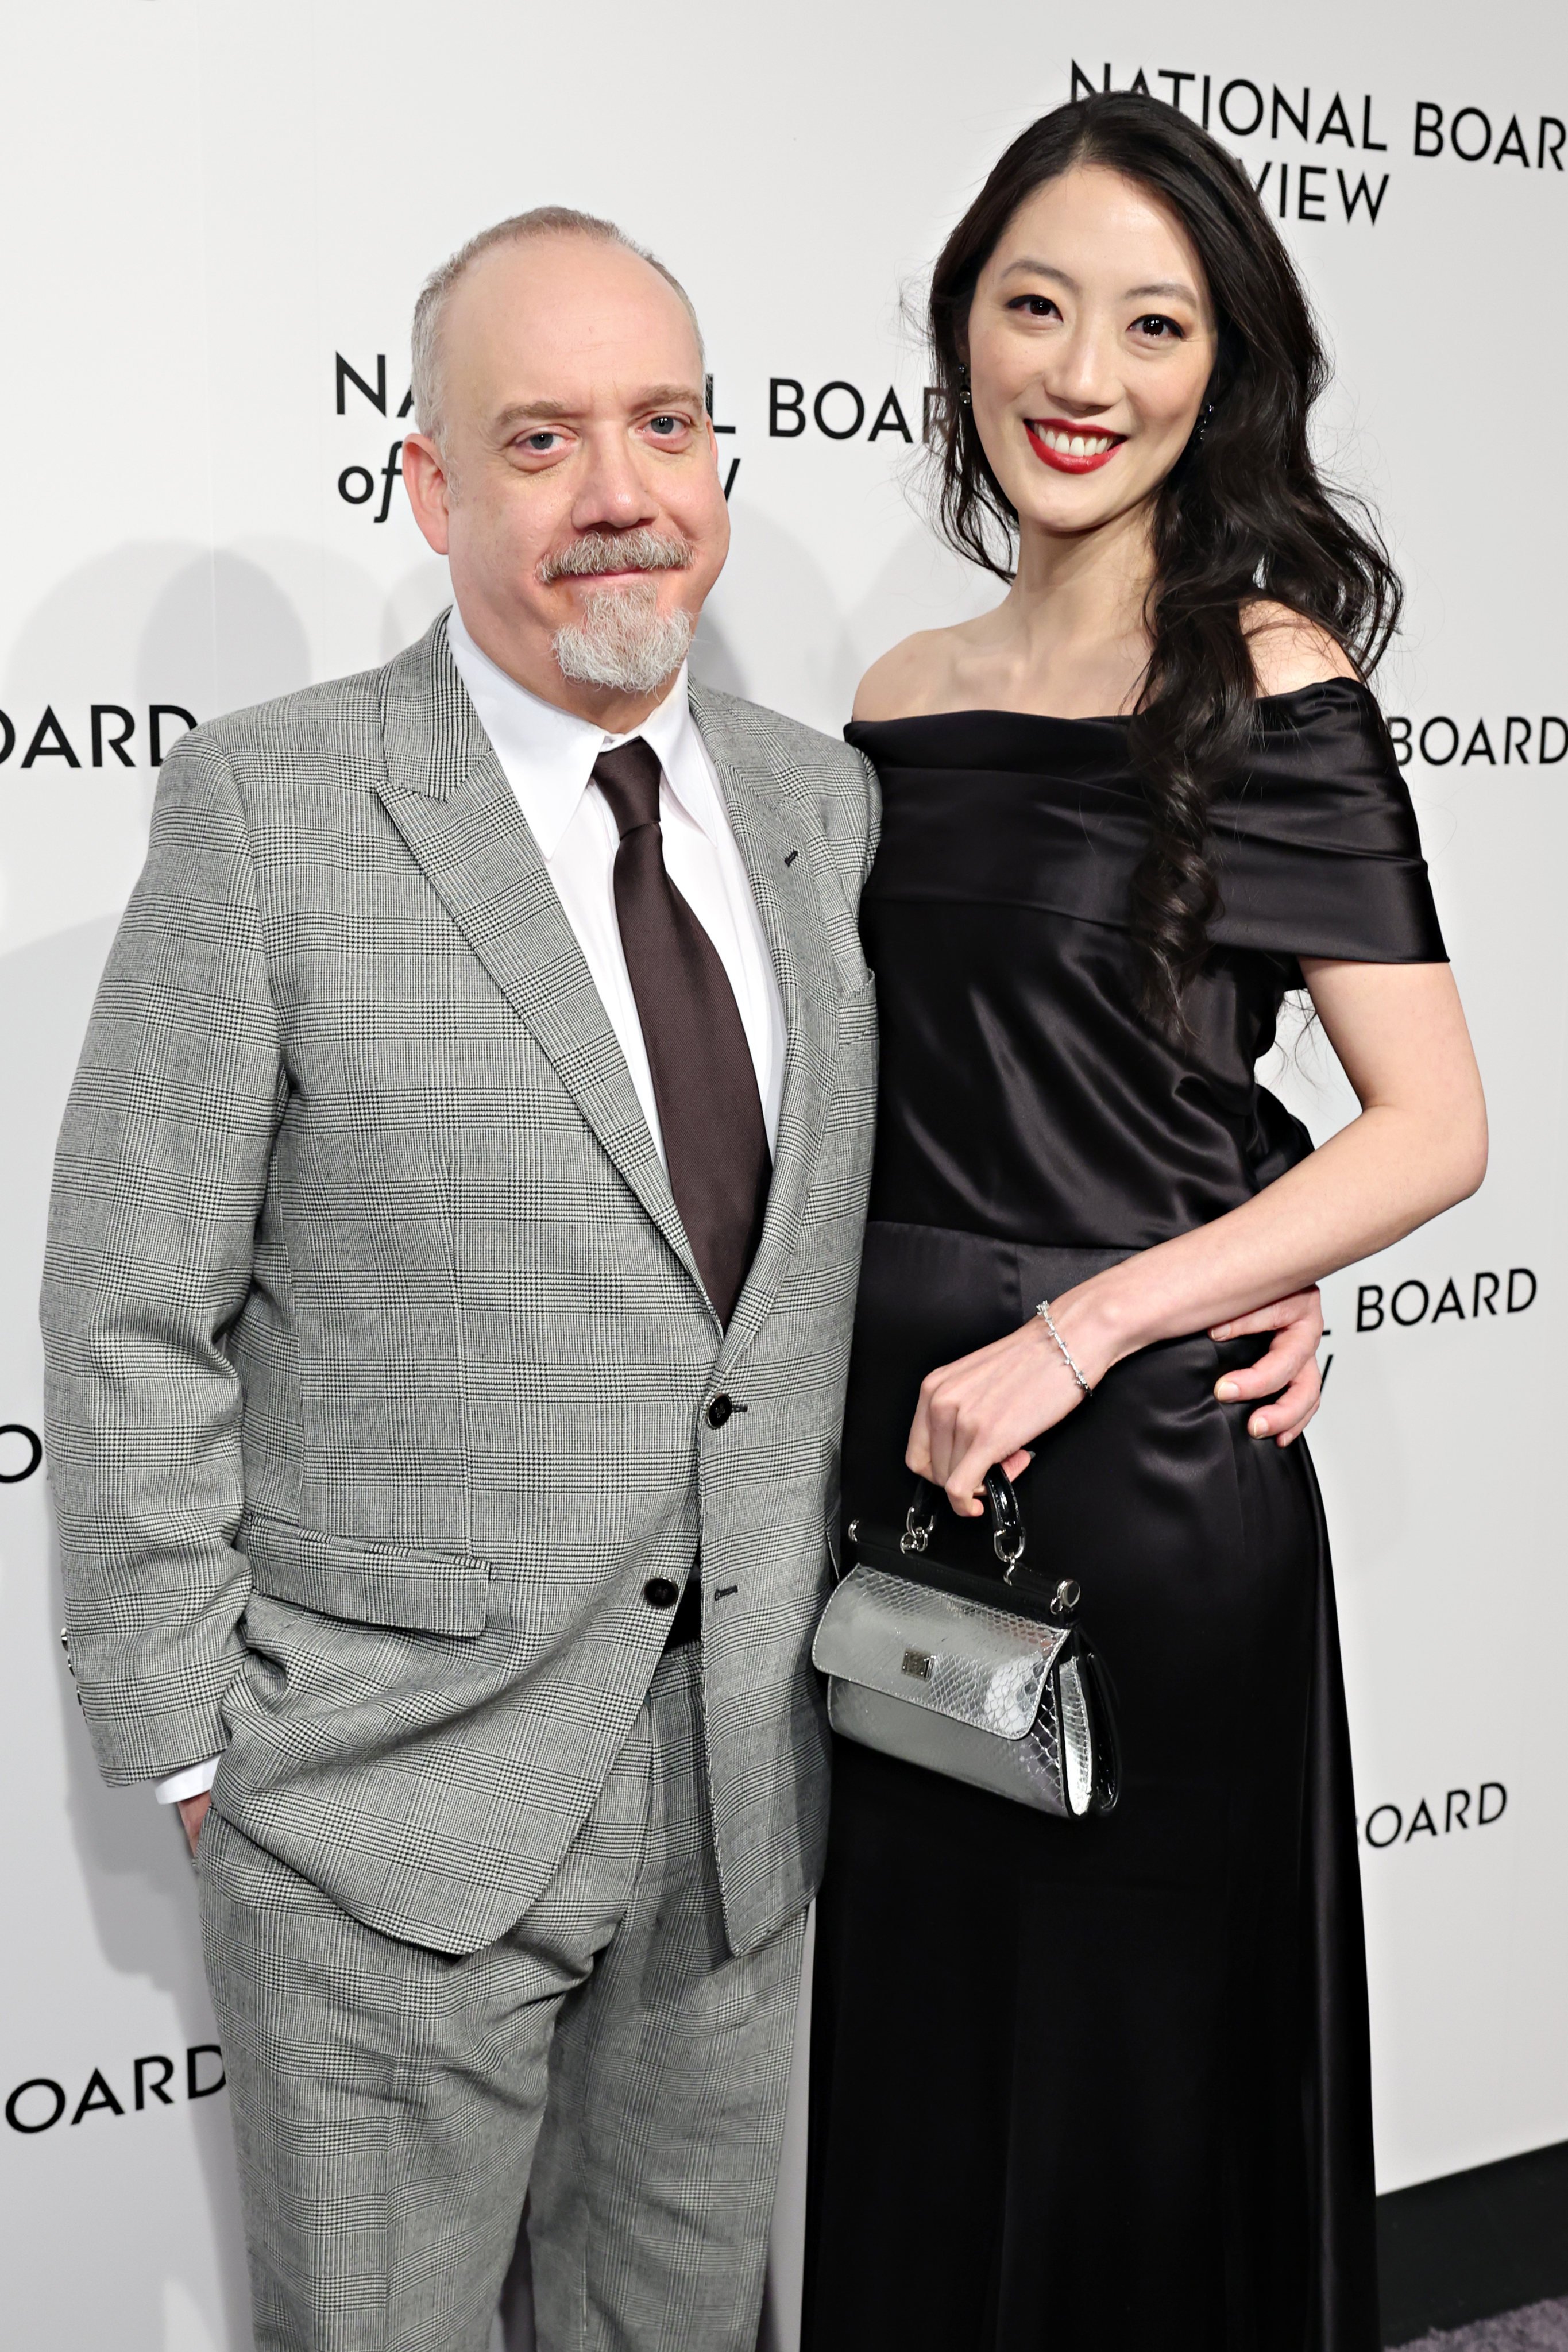 Former Billions co-stars Paul Giamatti and Clara Wong appear to be going public with their relationship. Photo: WireImage